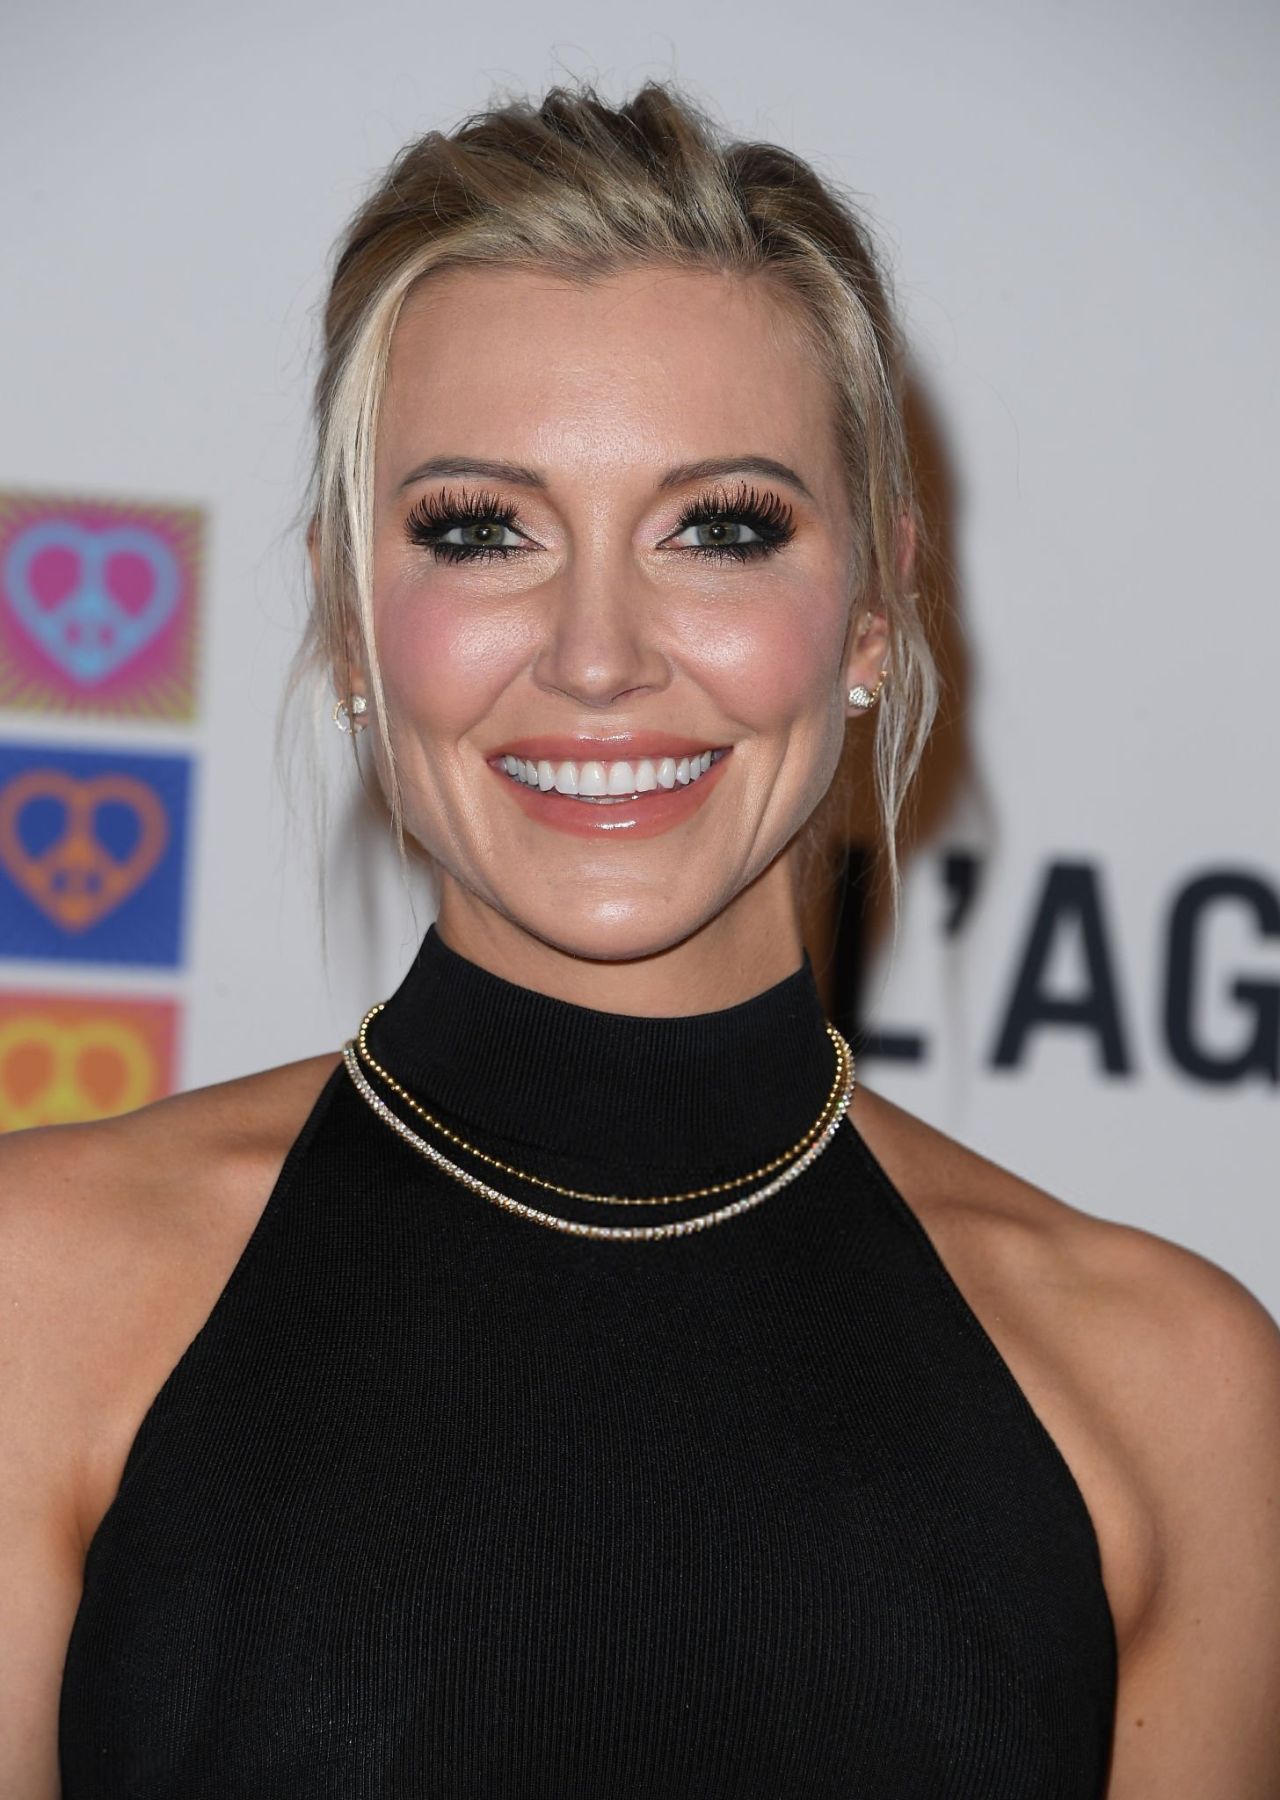 KATIE CASSIDY AT 31ST ANNUAL RACE TO ERASE MS GALA AT FAIRMONT CENTURY PLAZA IN LOS ANGELES06